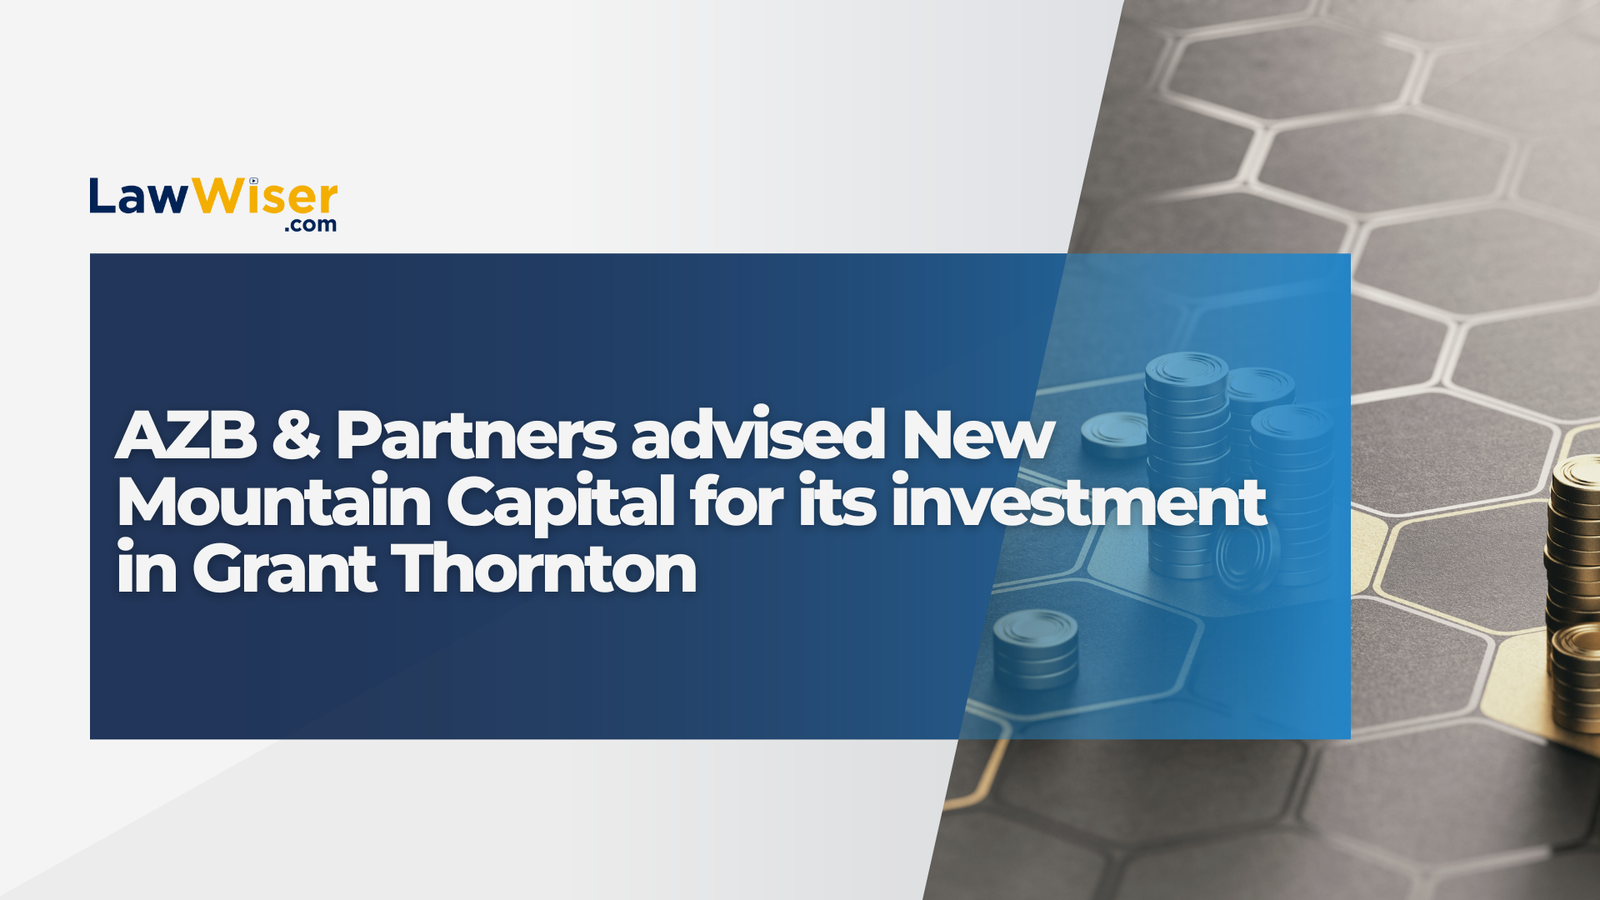 AZB & Partners advised New Mountain Capital for its investment in Grant Thornton